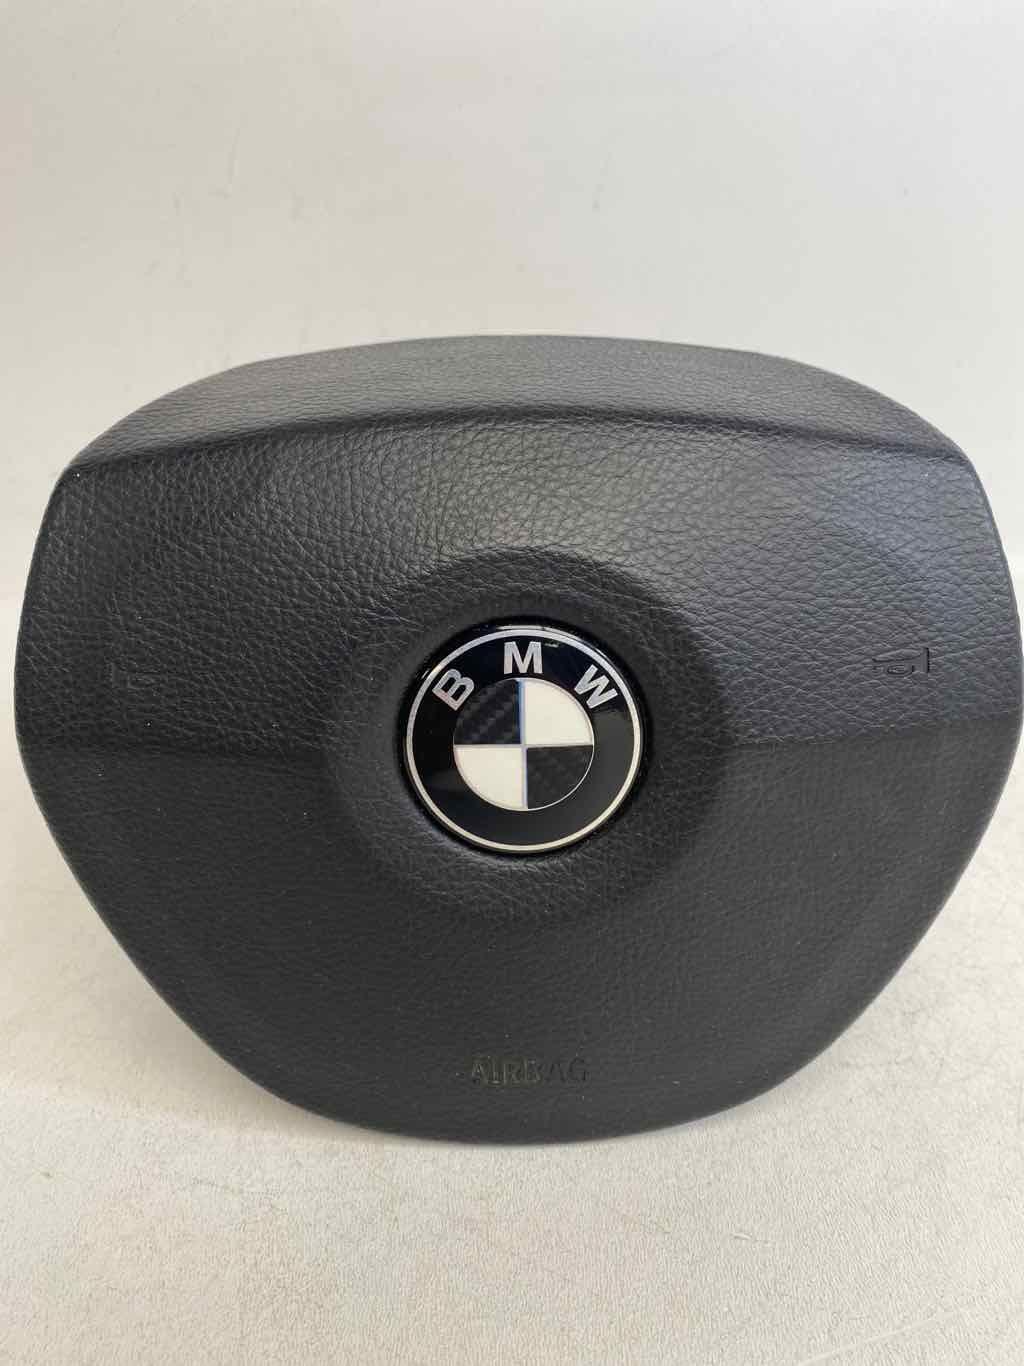 Used LH Driver Steering Wheel Air Bag 3 Spoke Fits 09-15 BMW 740I WITH Receipt✅